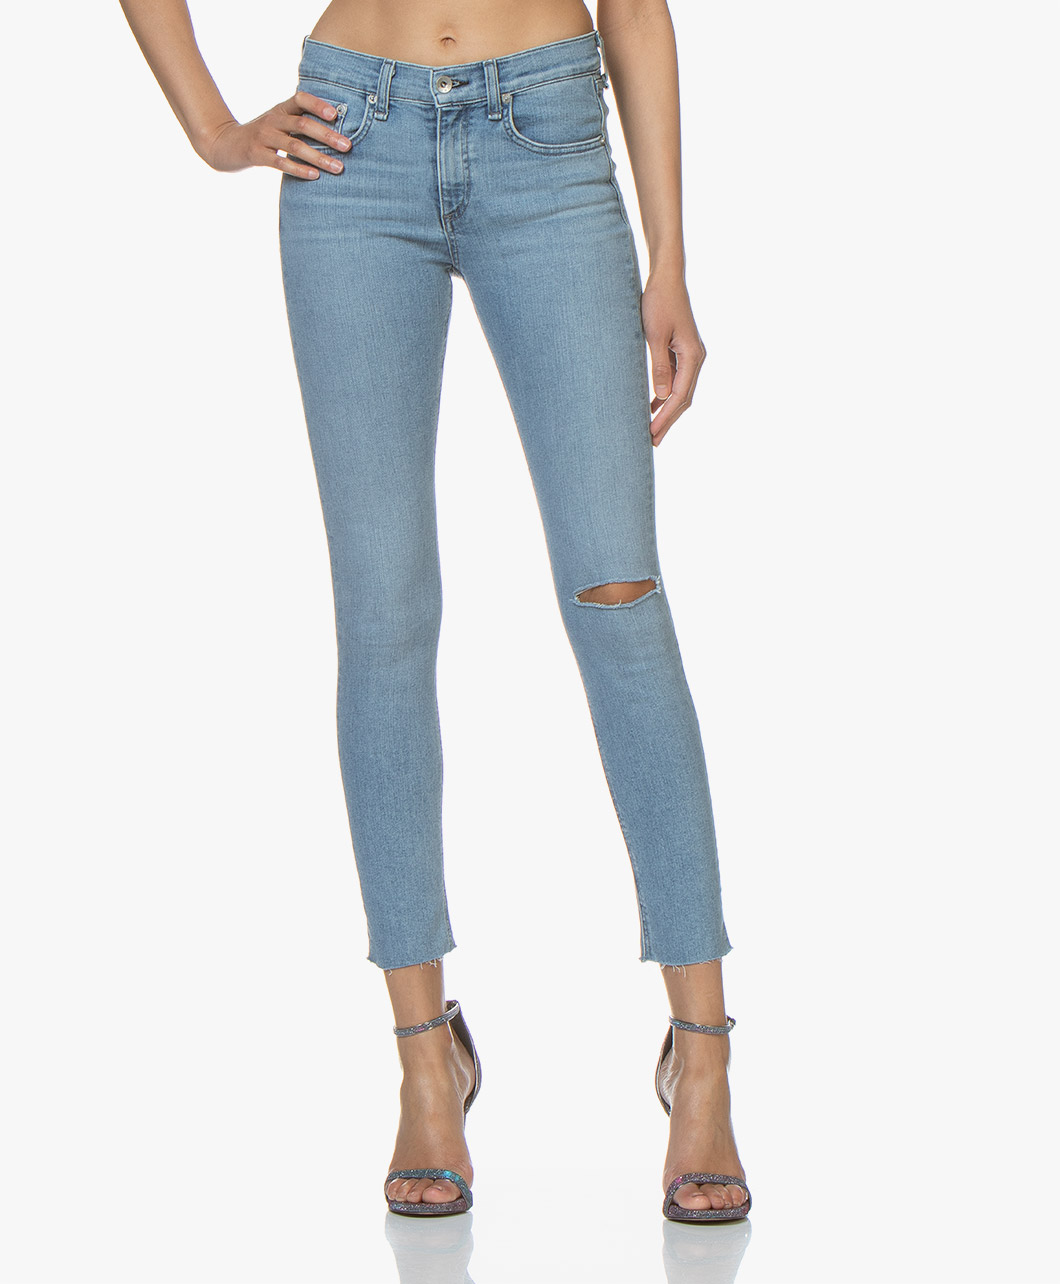 ankle skinny jeans